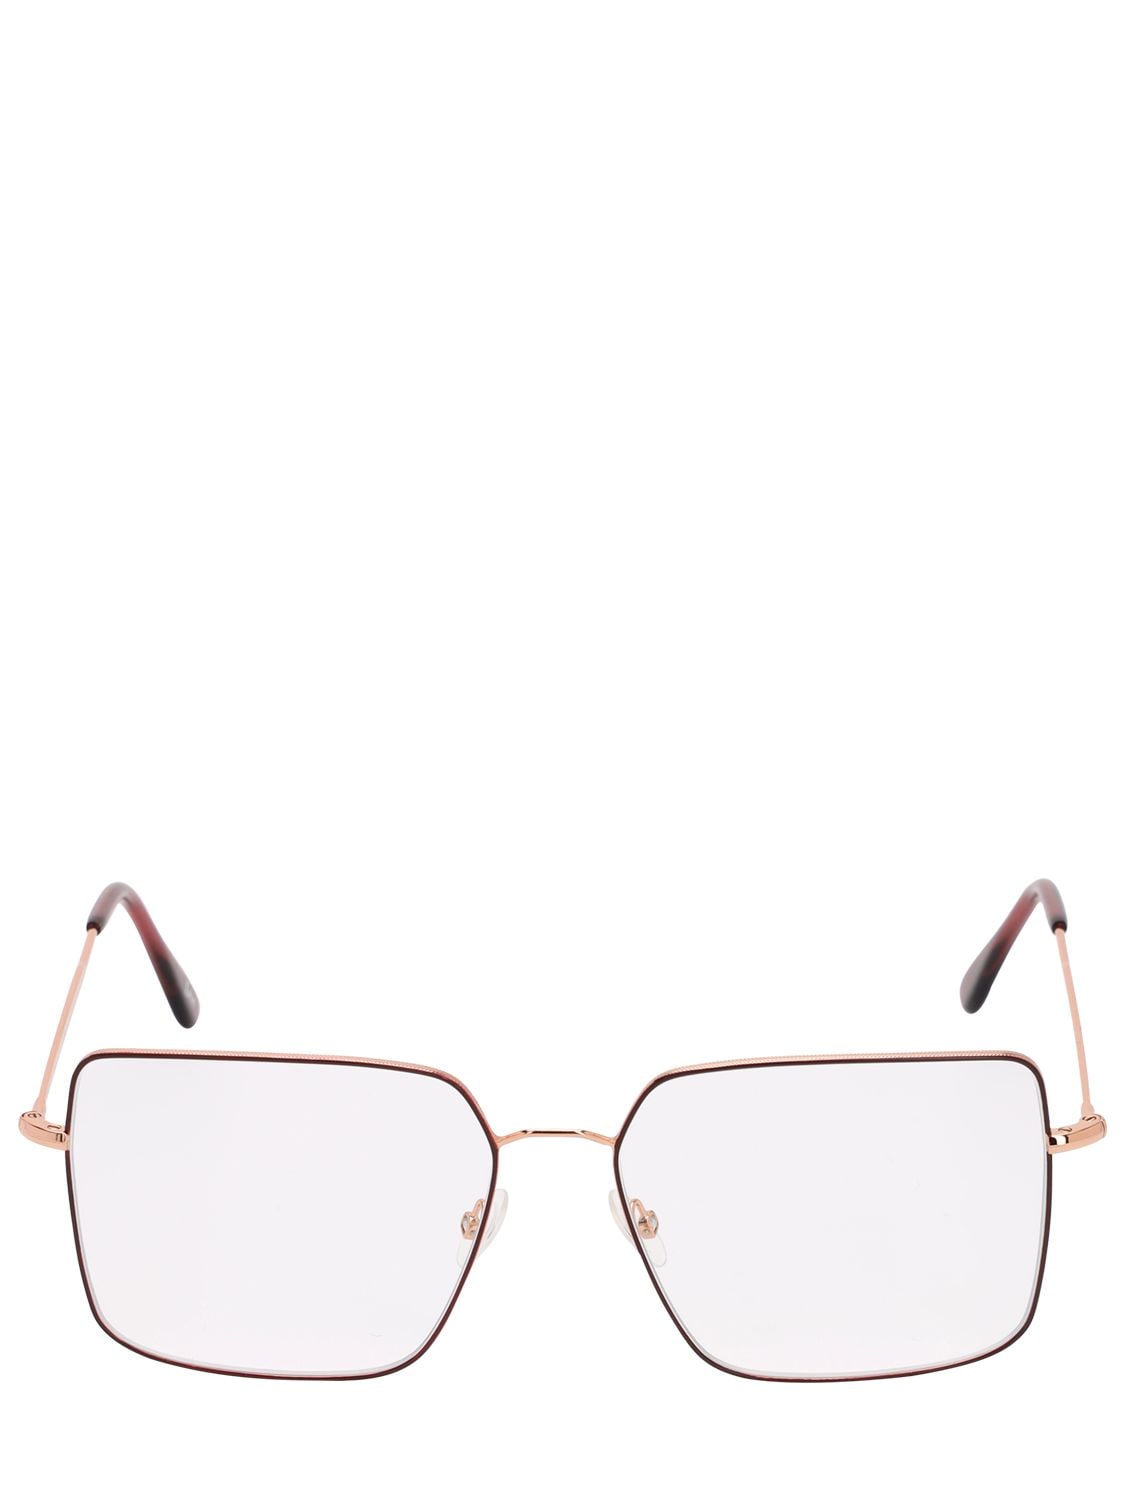 Andy Wolf 方形金属框光学眼镜 In Rose Gold,clear